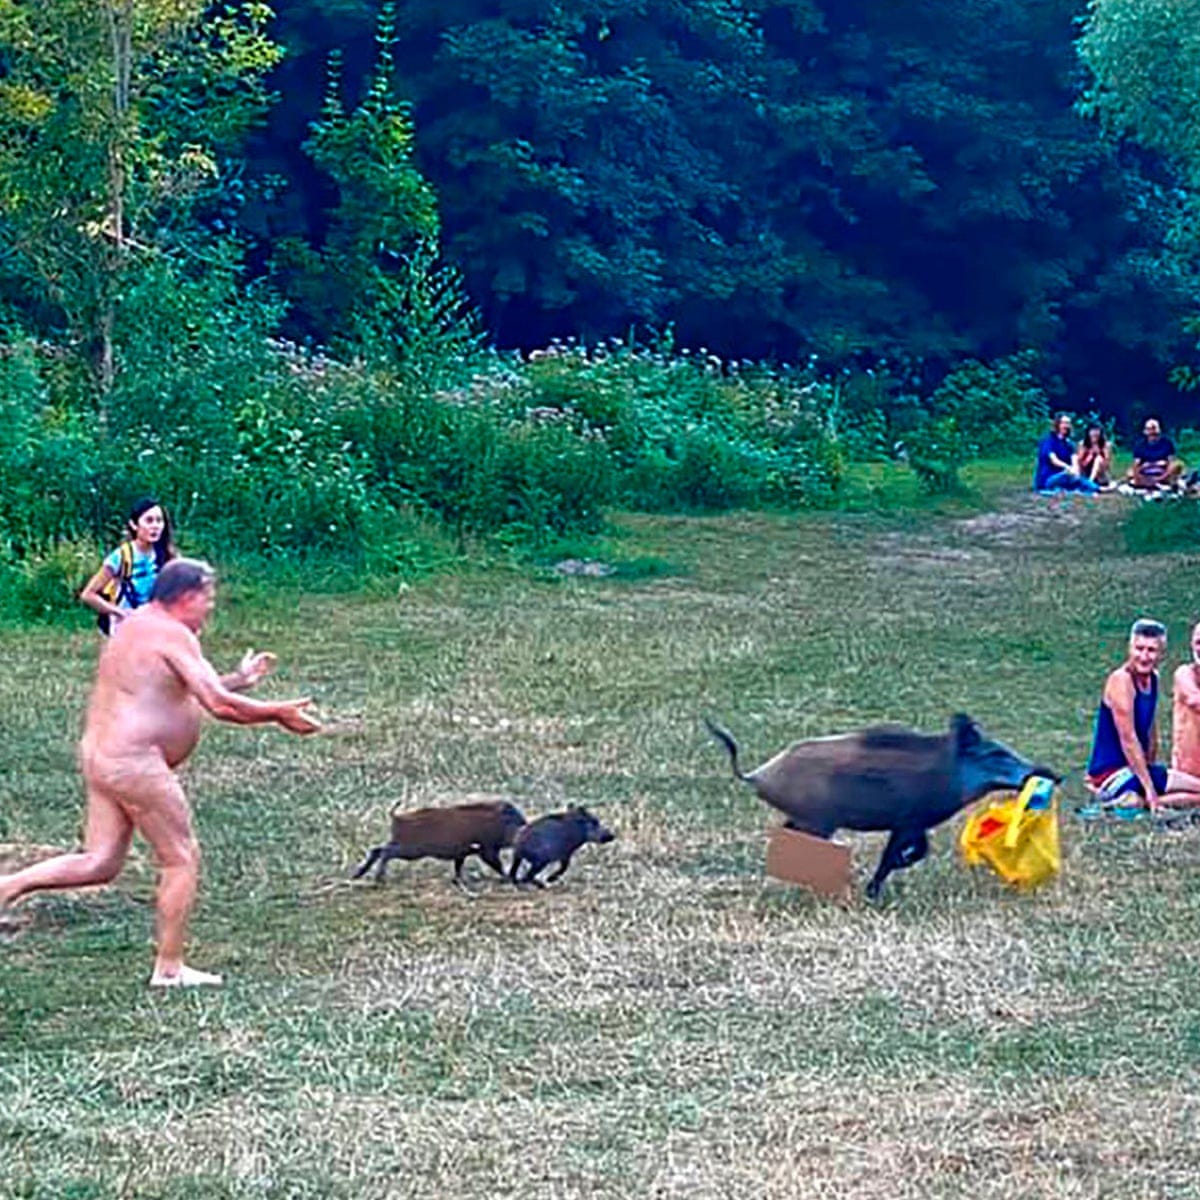 You swine! German nudist chases wild boar that stole laptop | Germany | The  Guardian